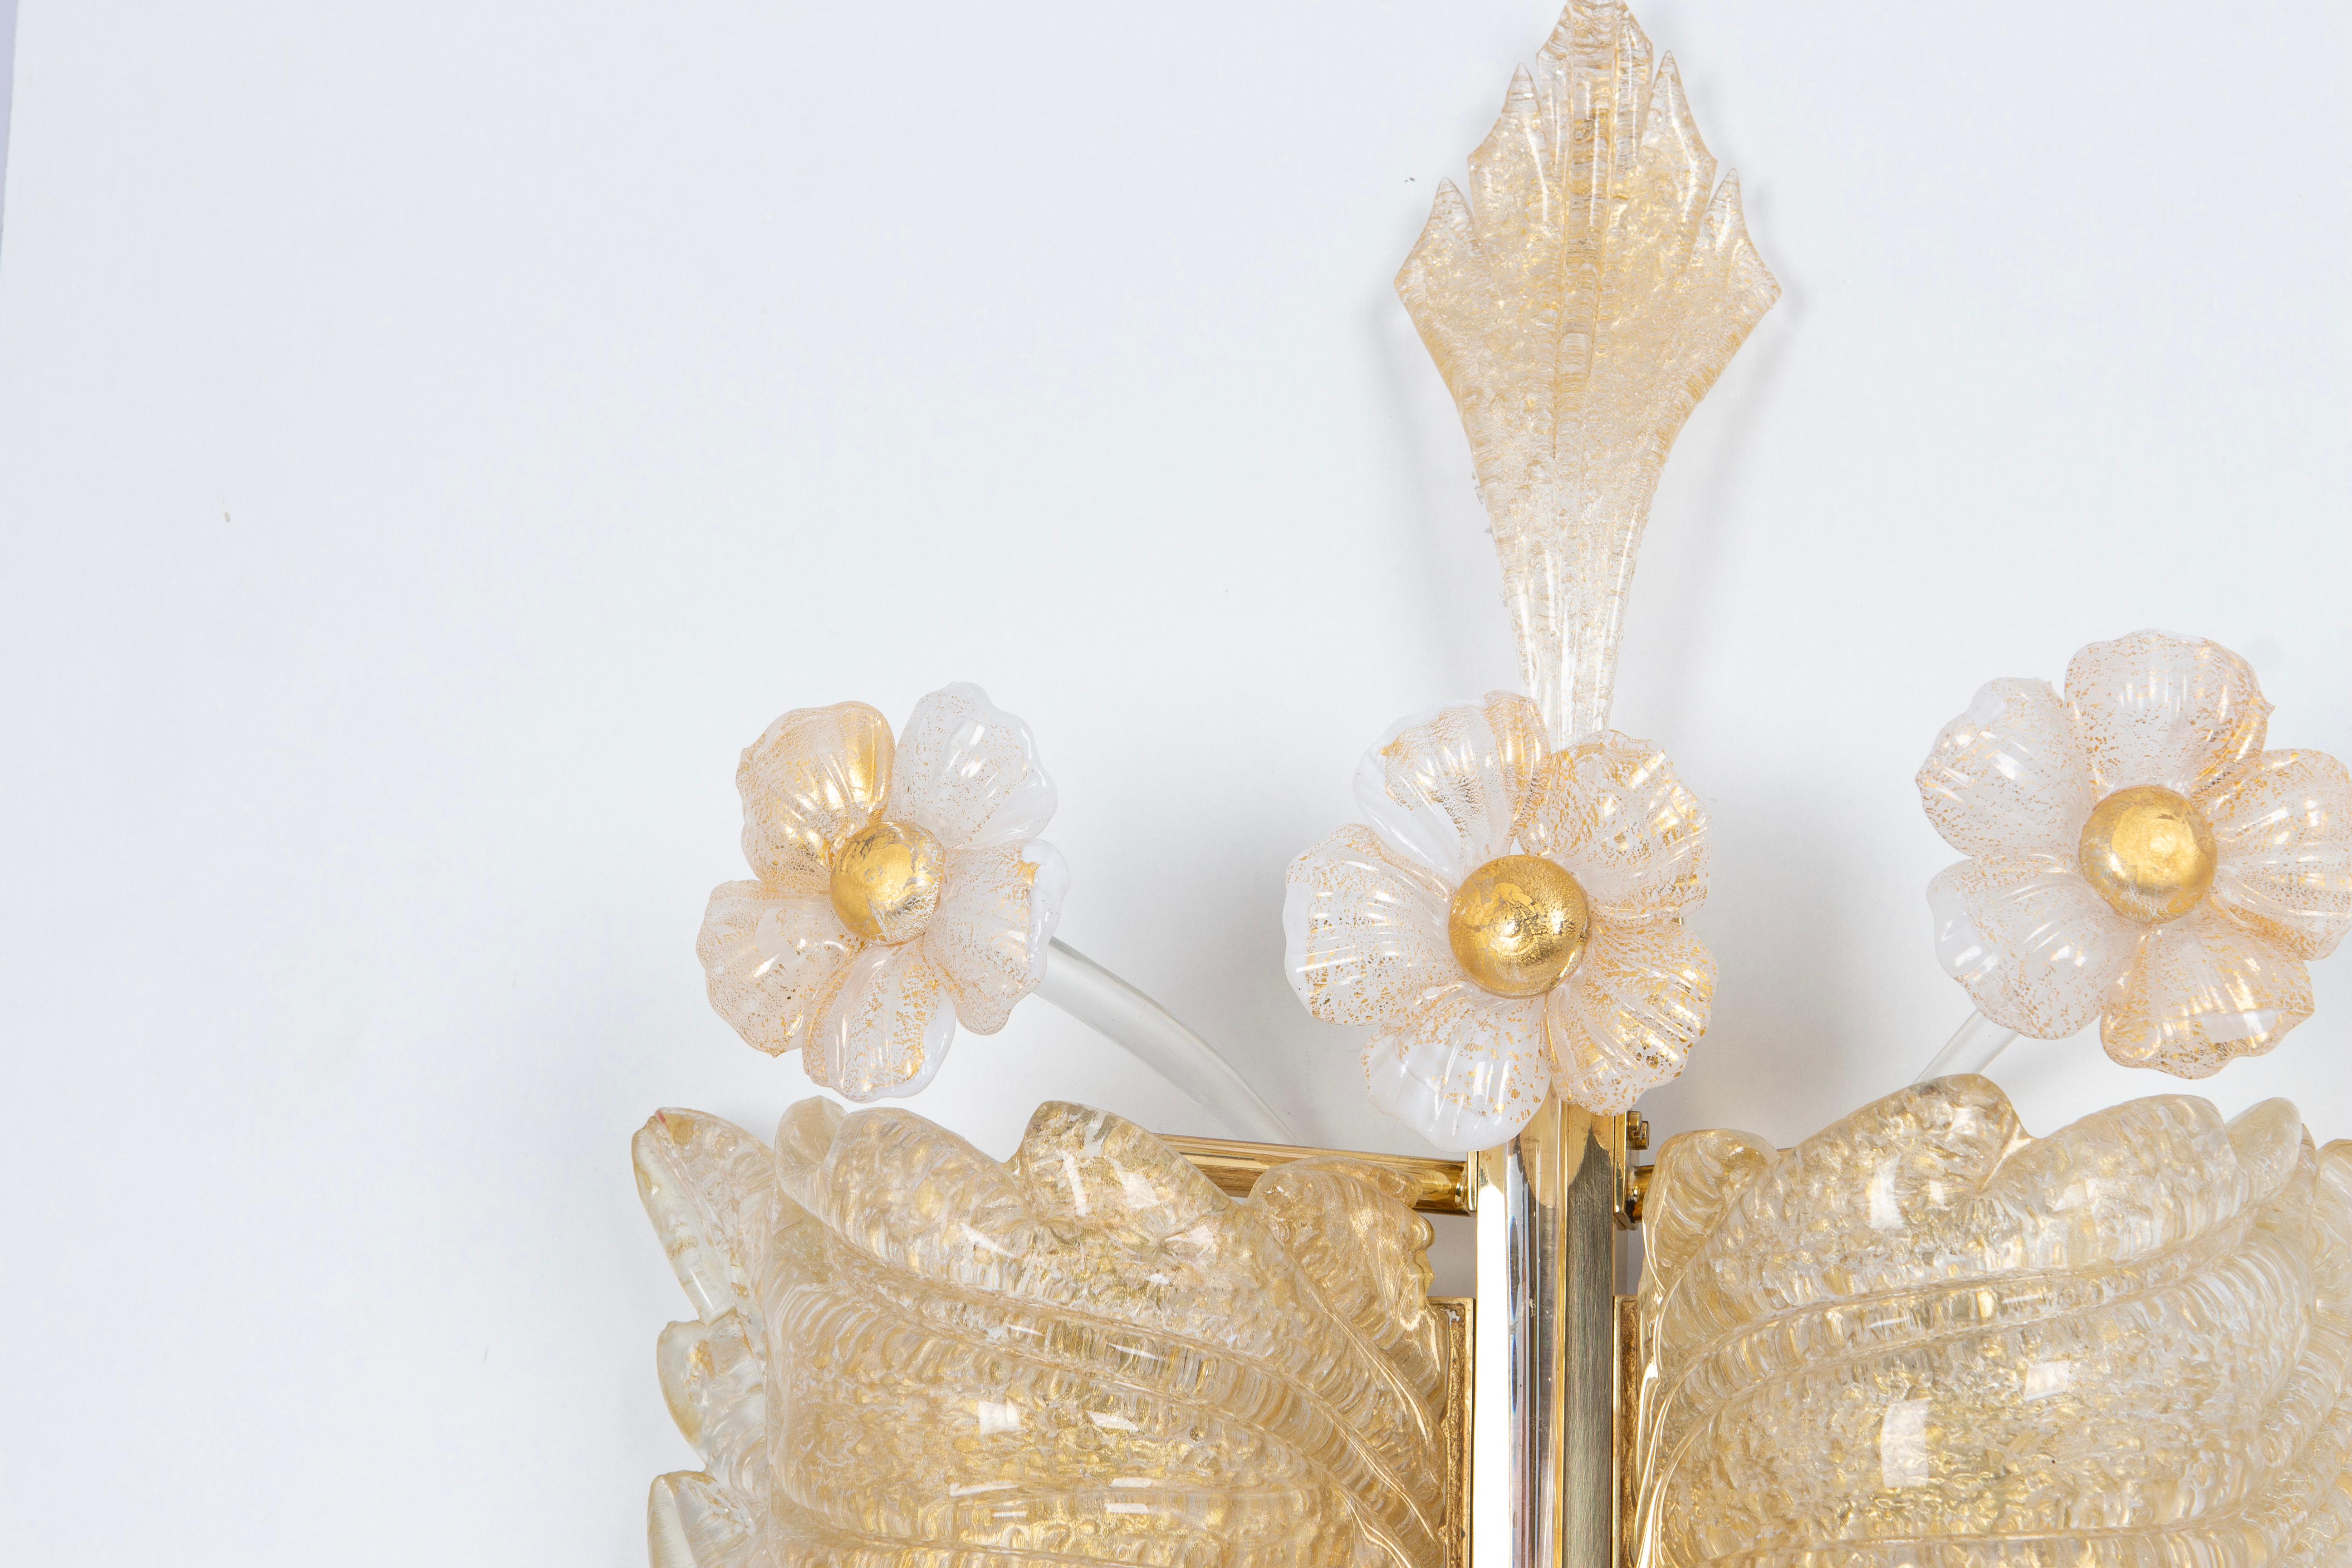 Pair of Large Murano Glass Wall Sconces by Barovier & Toso, Italy, 1970s For Sale 5